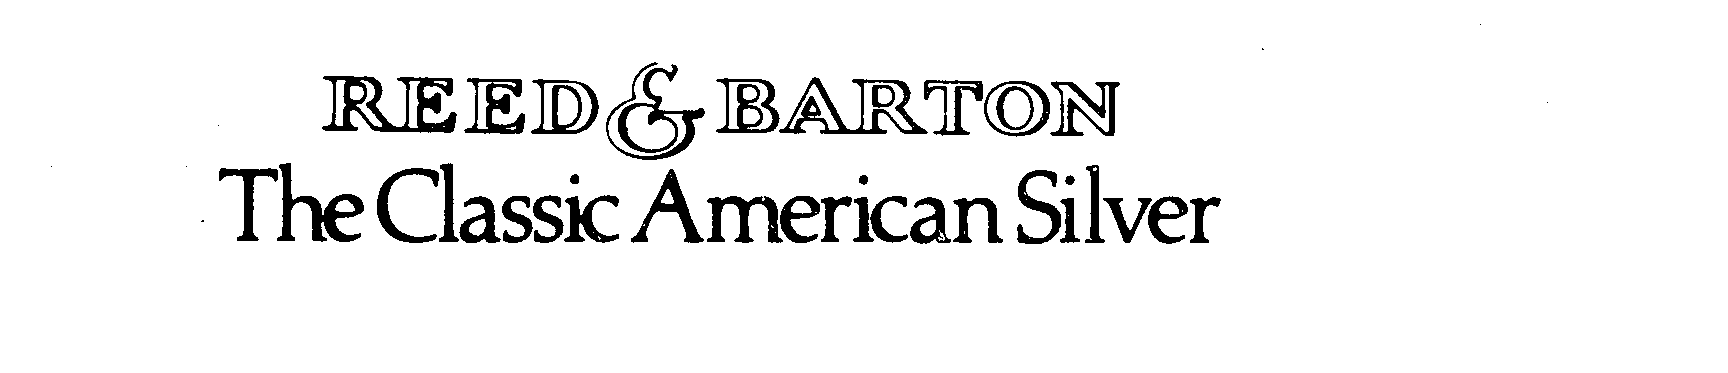  REED &amp; BARTON THE CLASSIC AMERICAN SILVER